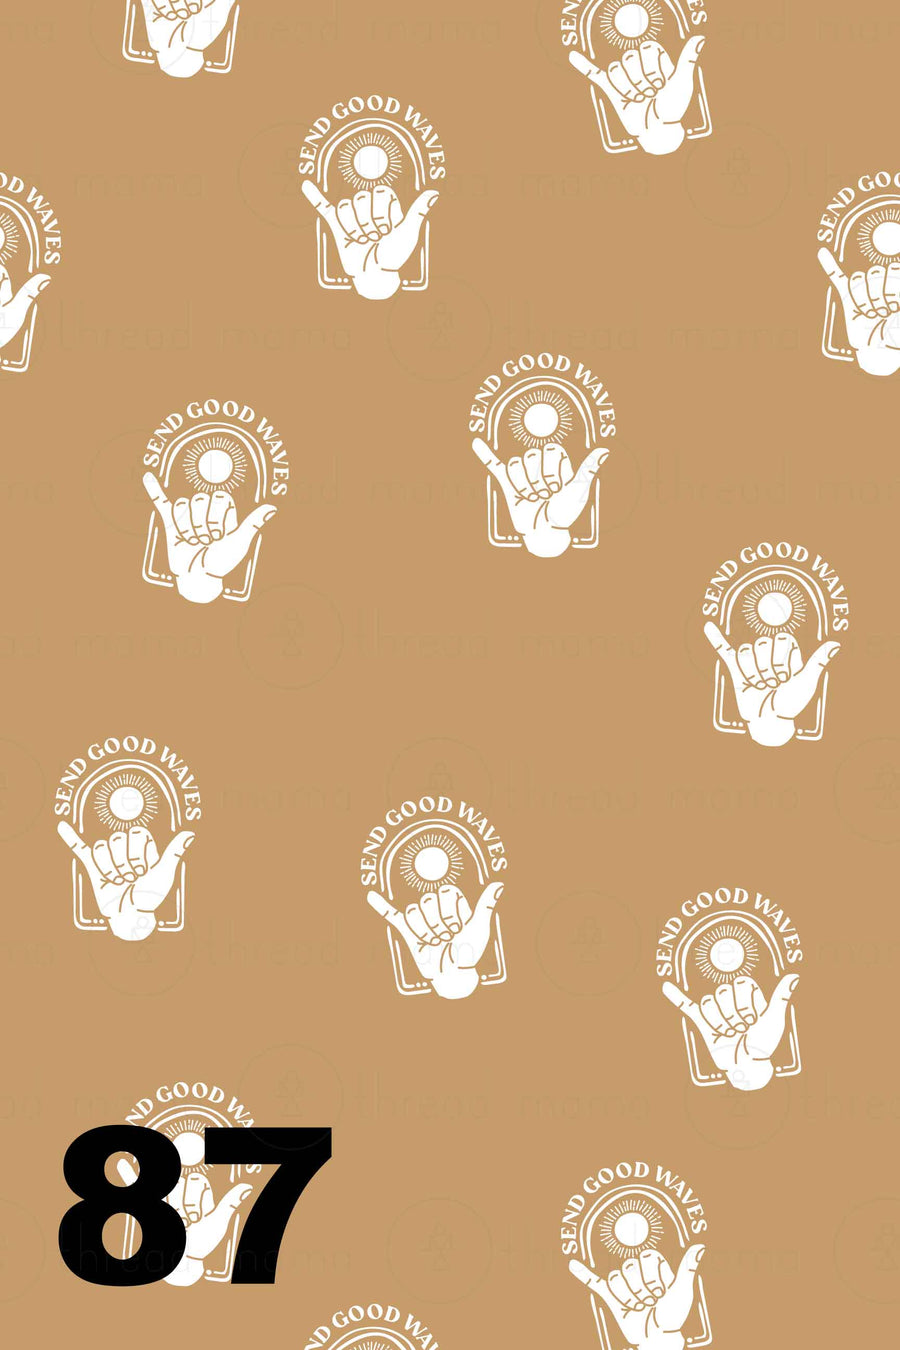 Background Pattern #87 (Printable Poster)